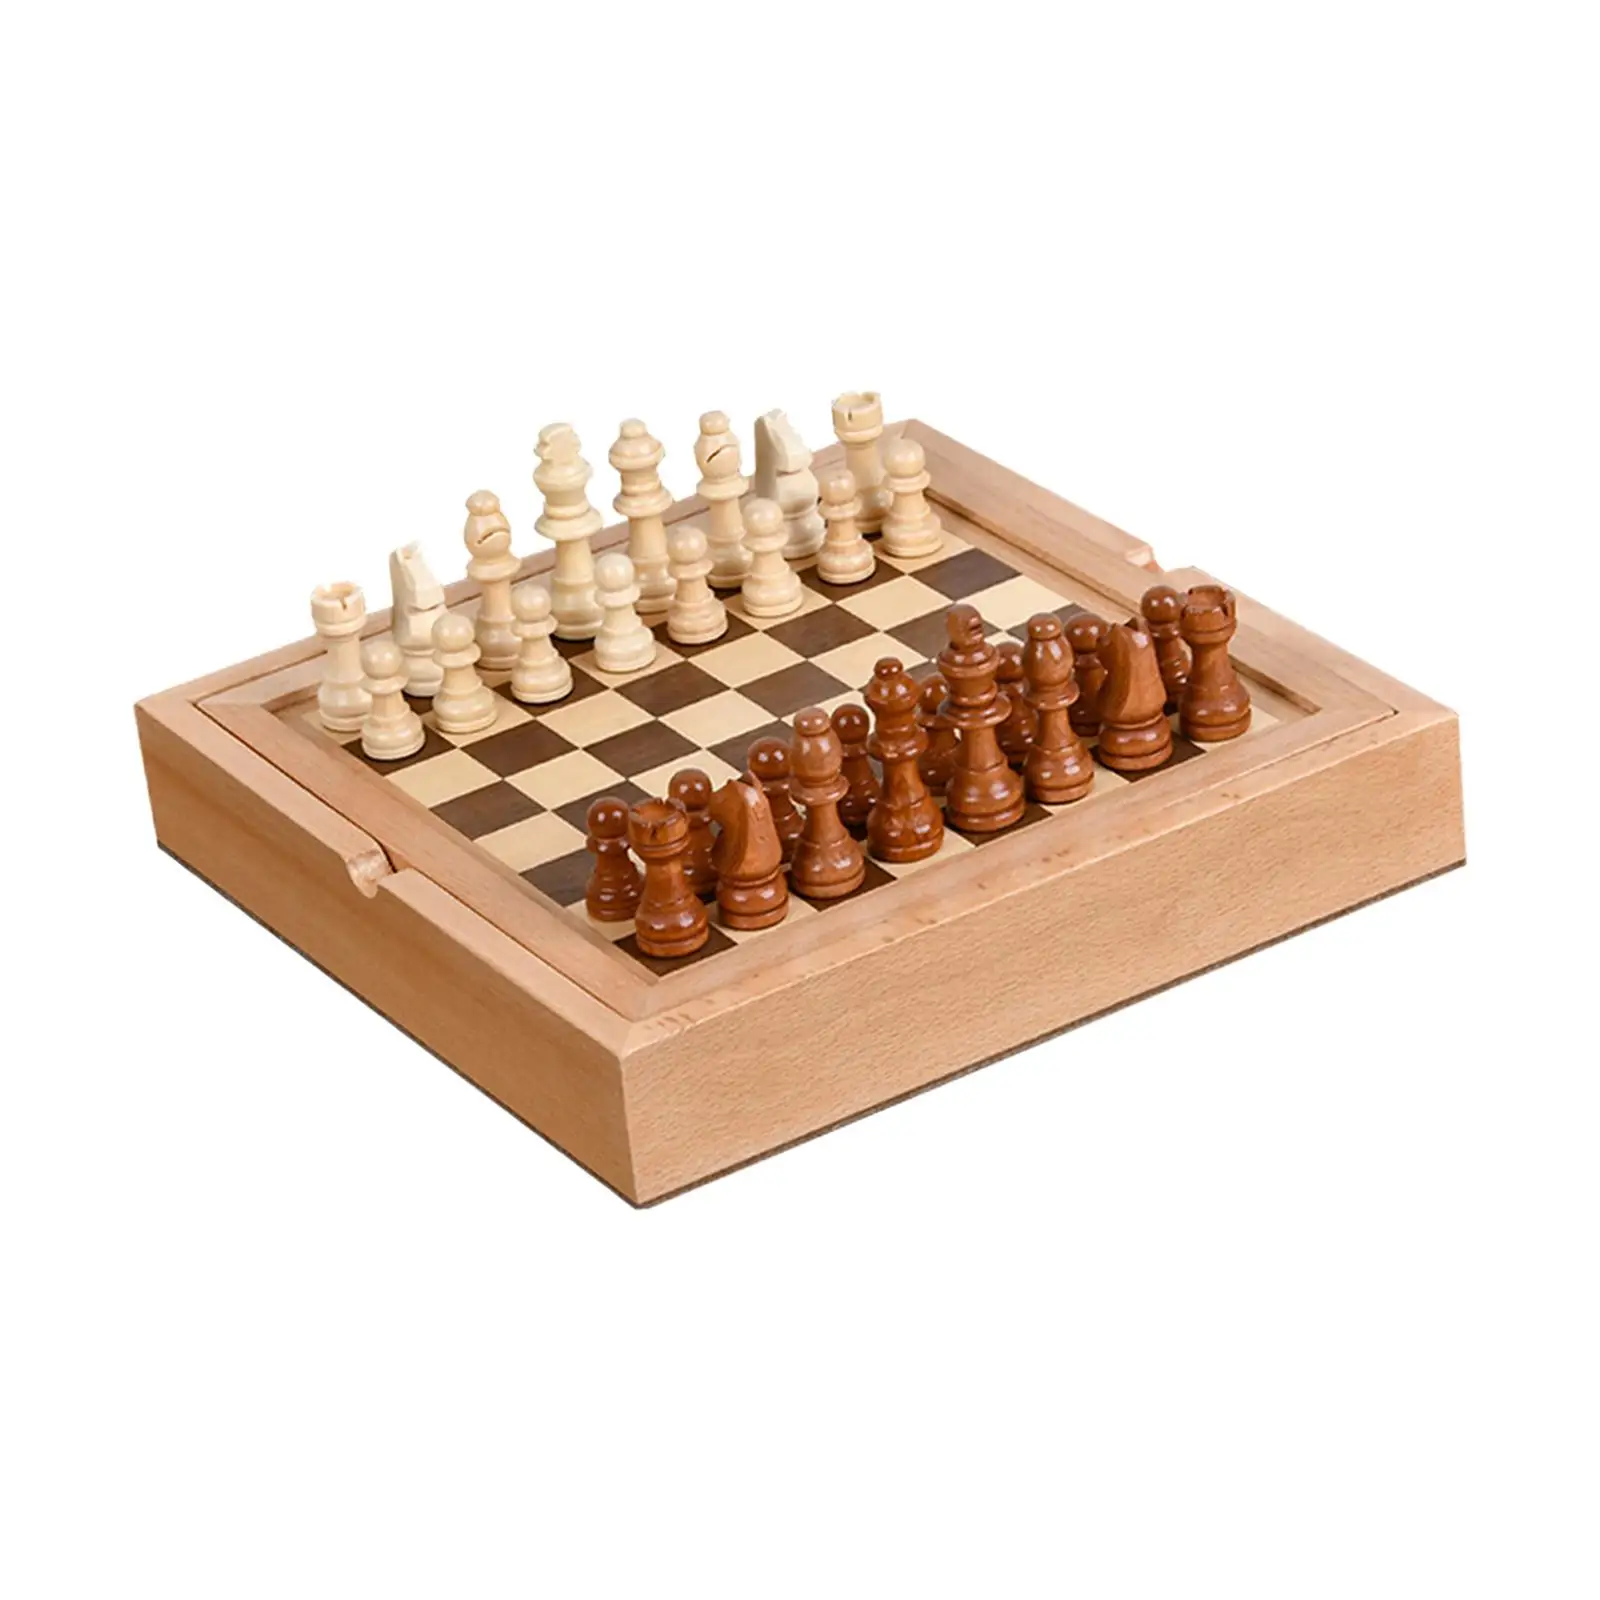 Portable Chess Board Set International Chess Set Chess Piece Set for Kids Gifts